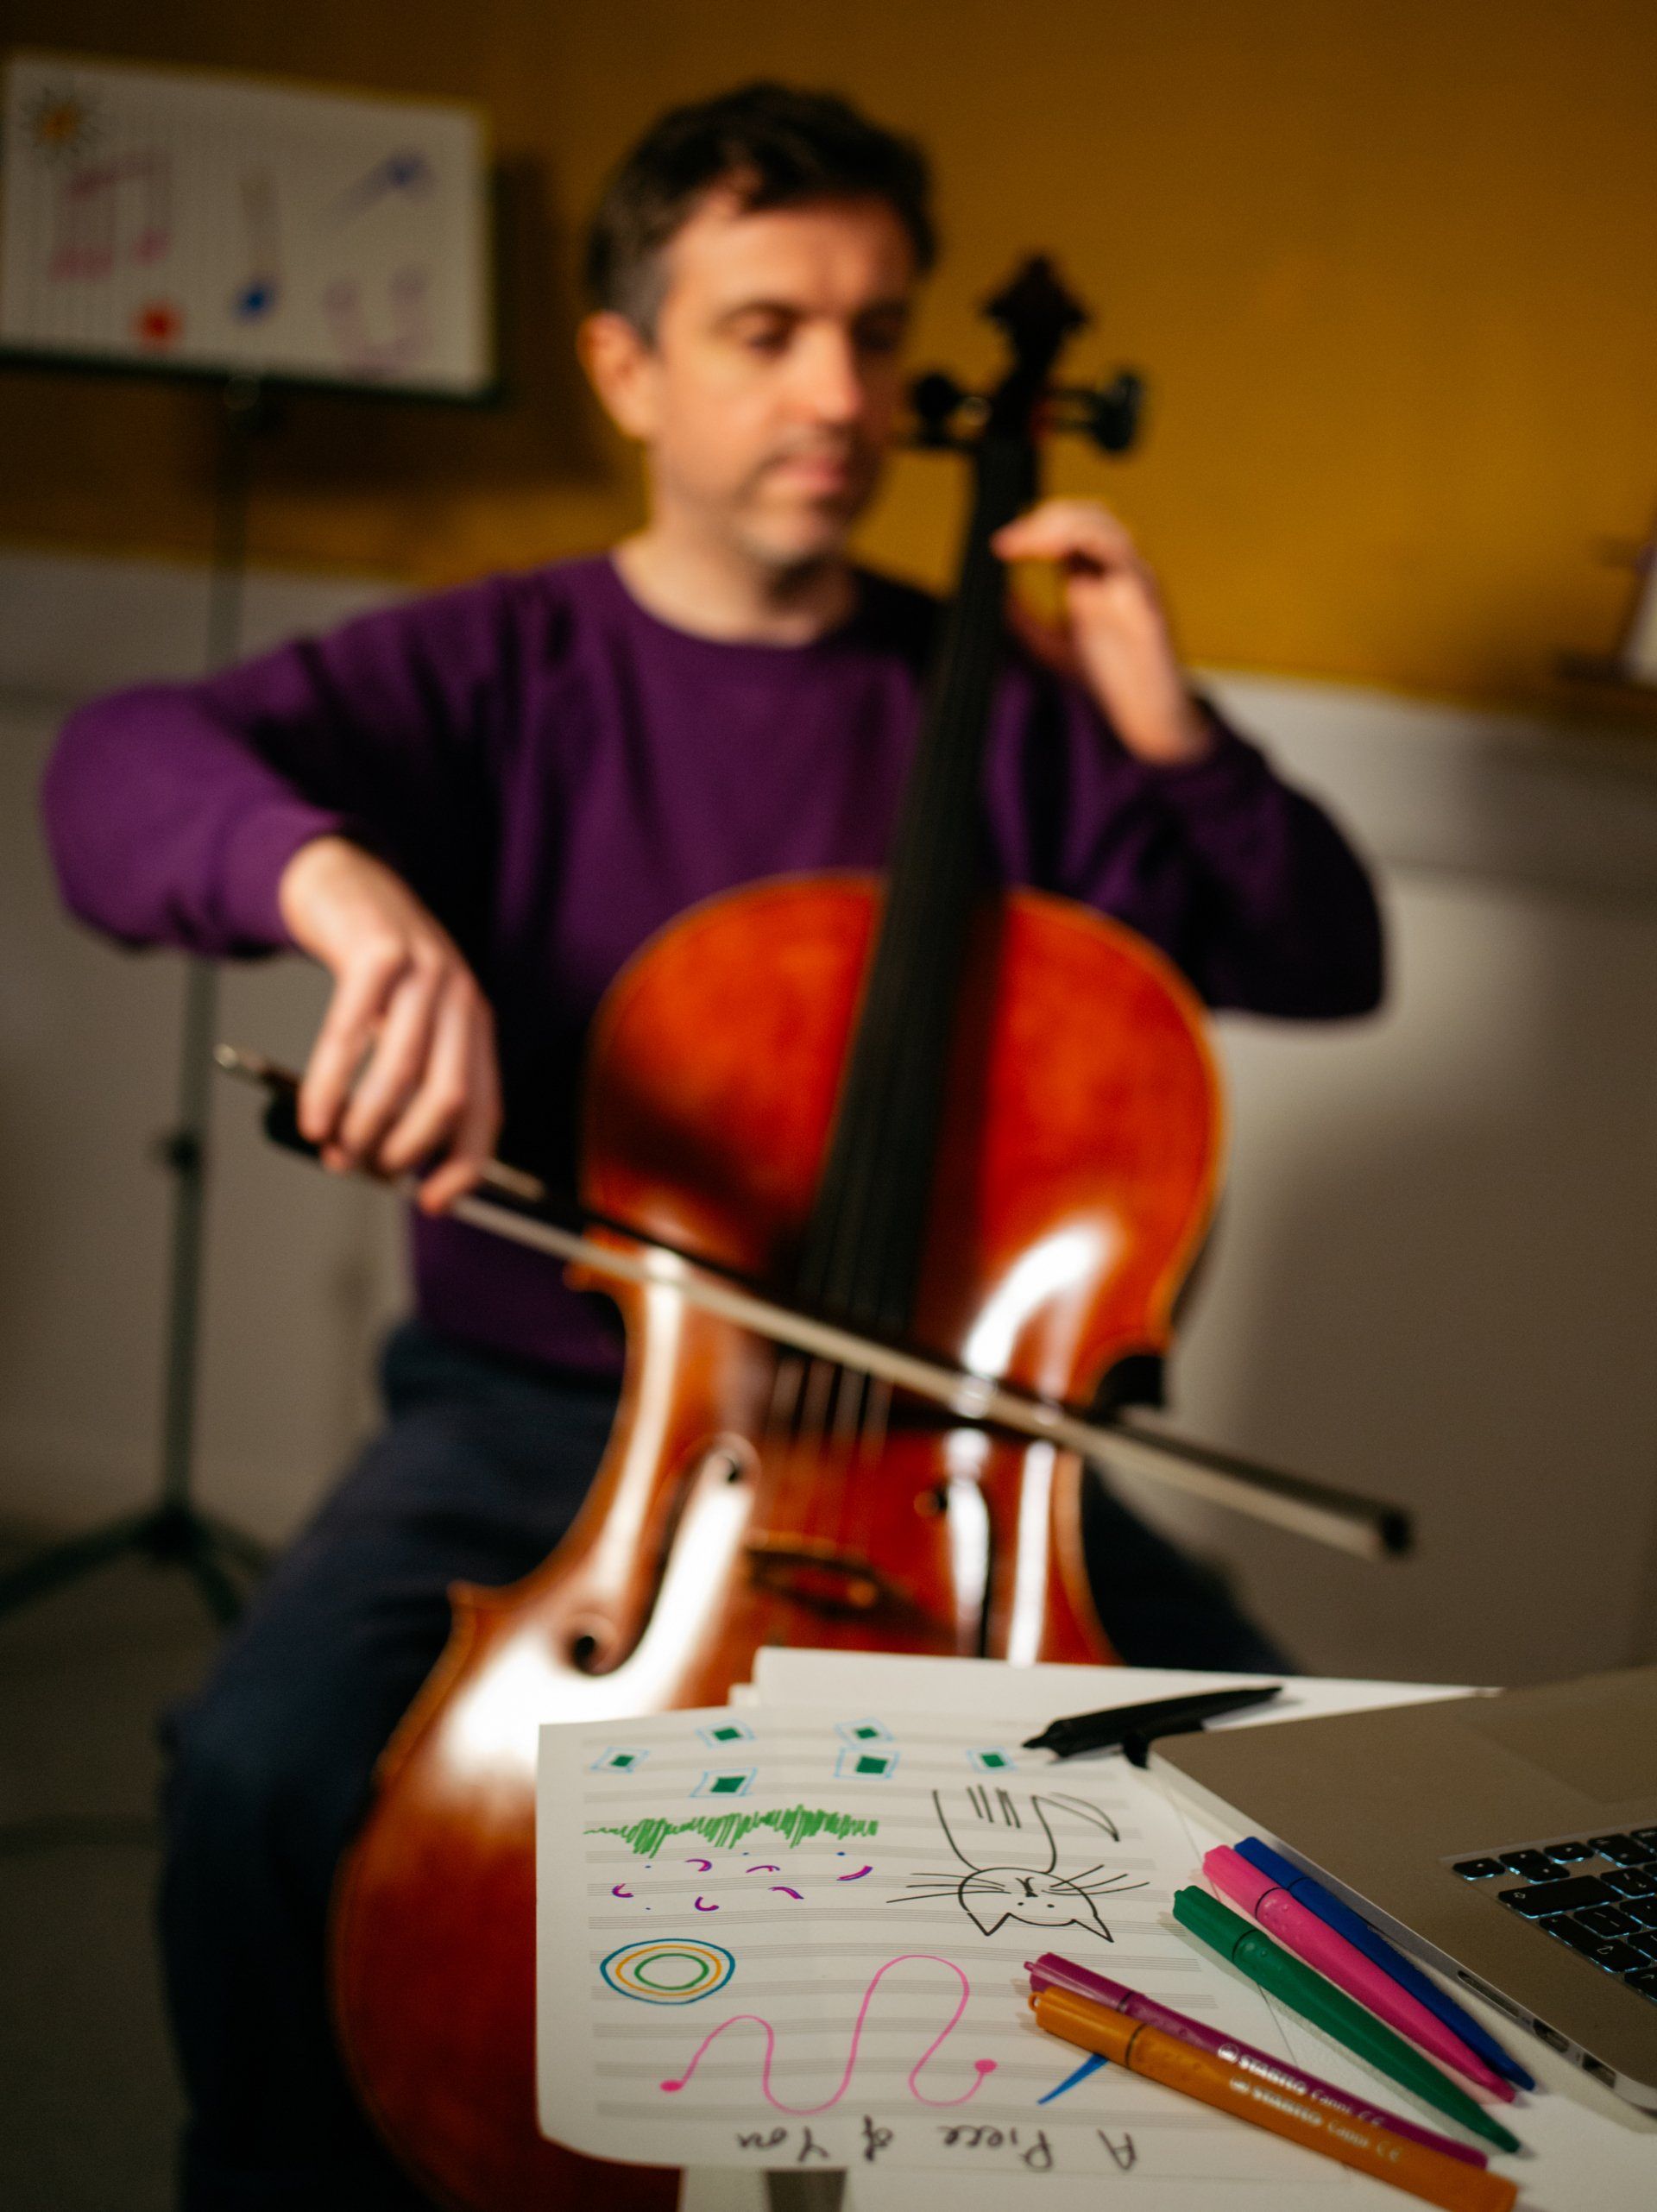 a man in a purple shirt is playing a cello